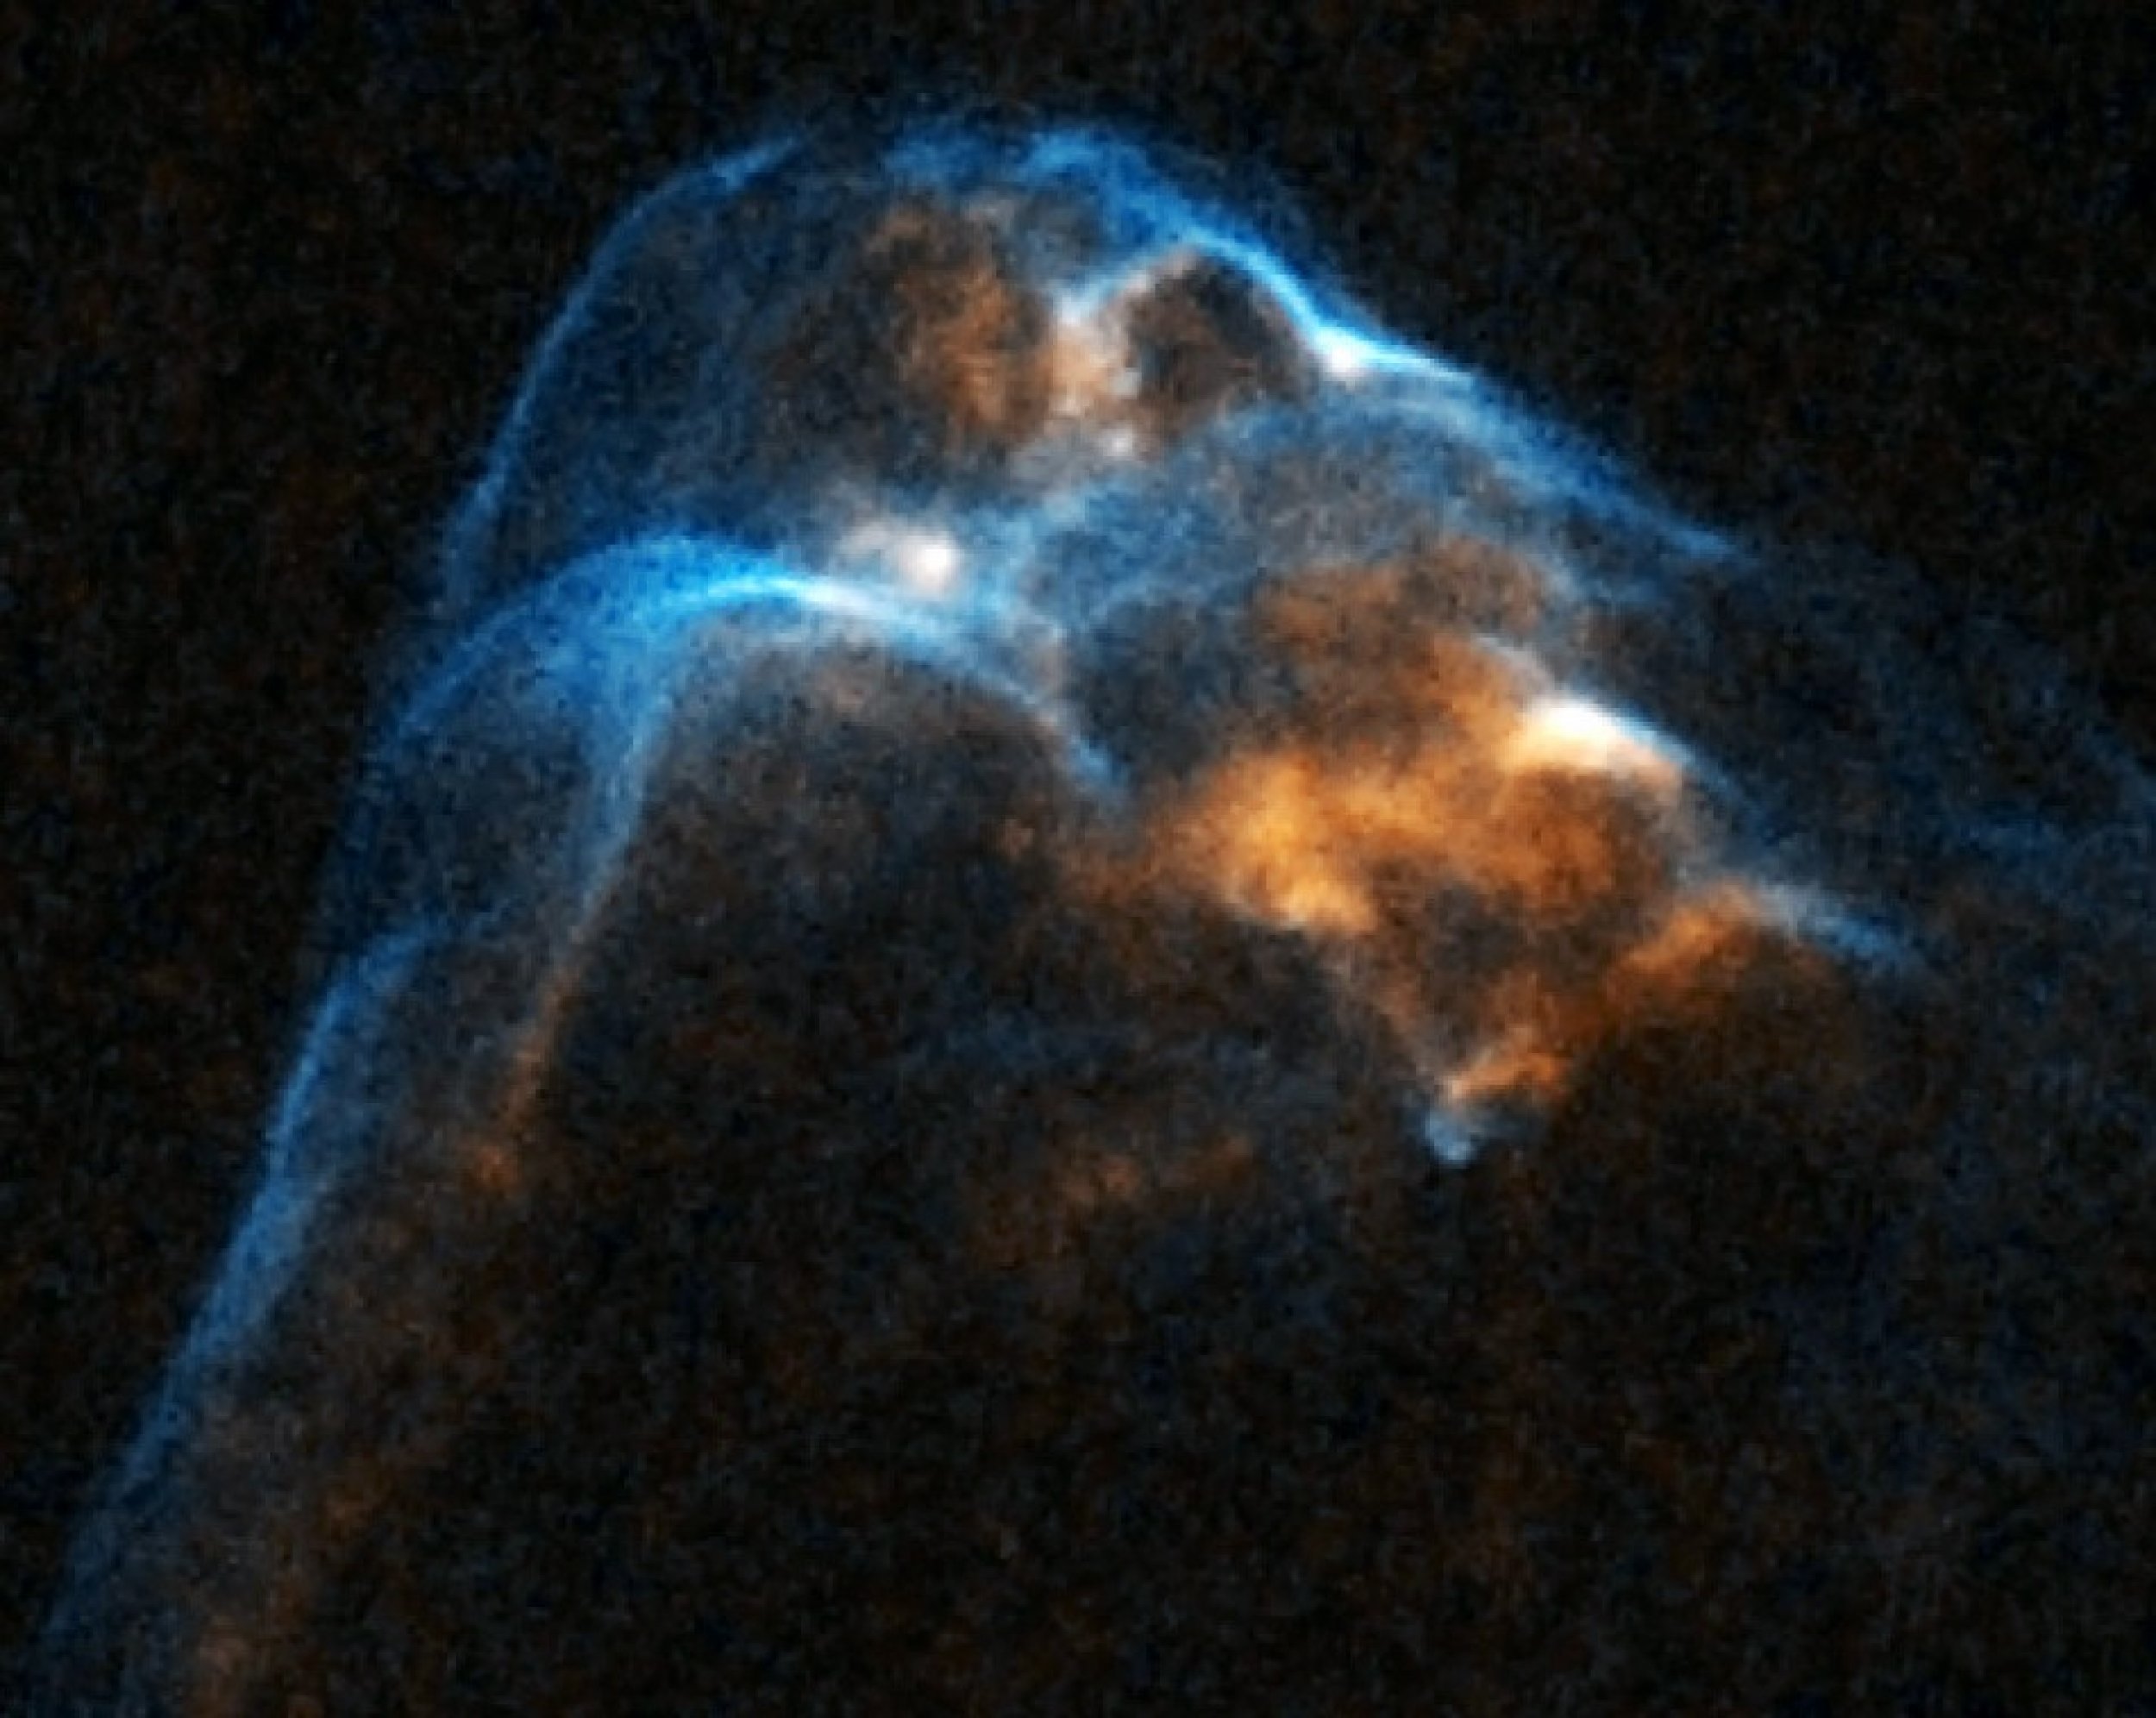 New Cosmic Images from Hubble Telescope Offers a Peek at Suns Birth